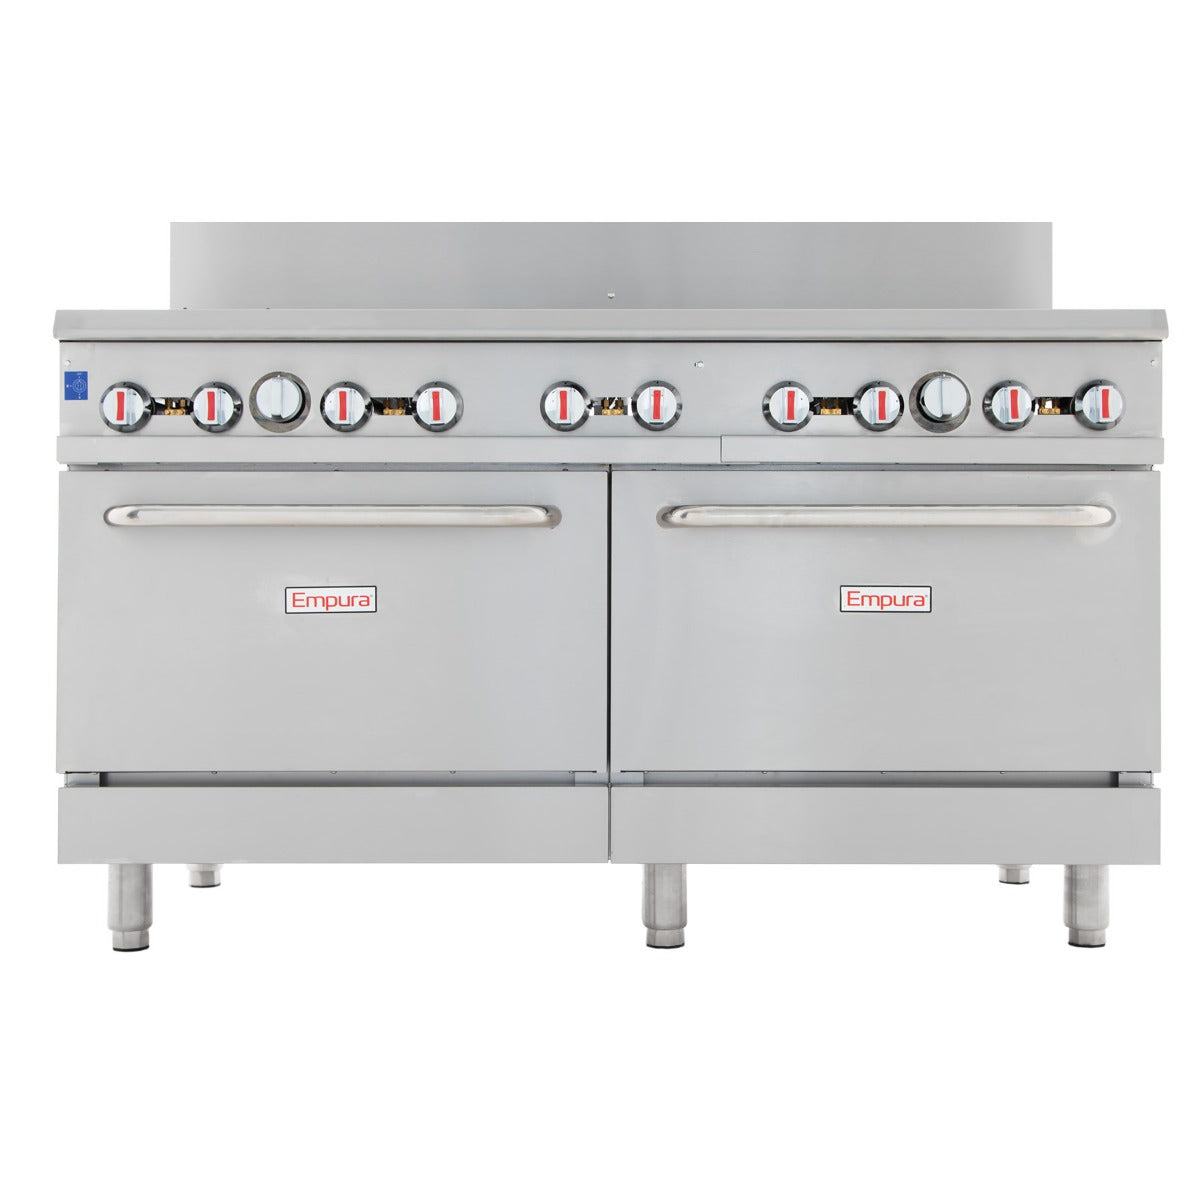 Empura EGR-60_LP 60" Stainless Steel Commercial Gas Range with Two Ovens, 10 Burners - Liquid Propane Gas, 360,000 BTU